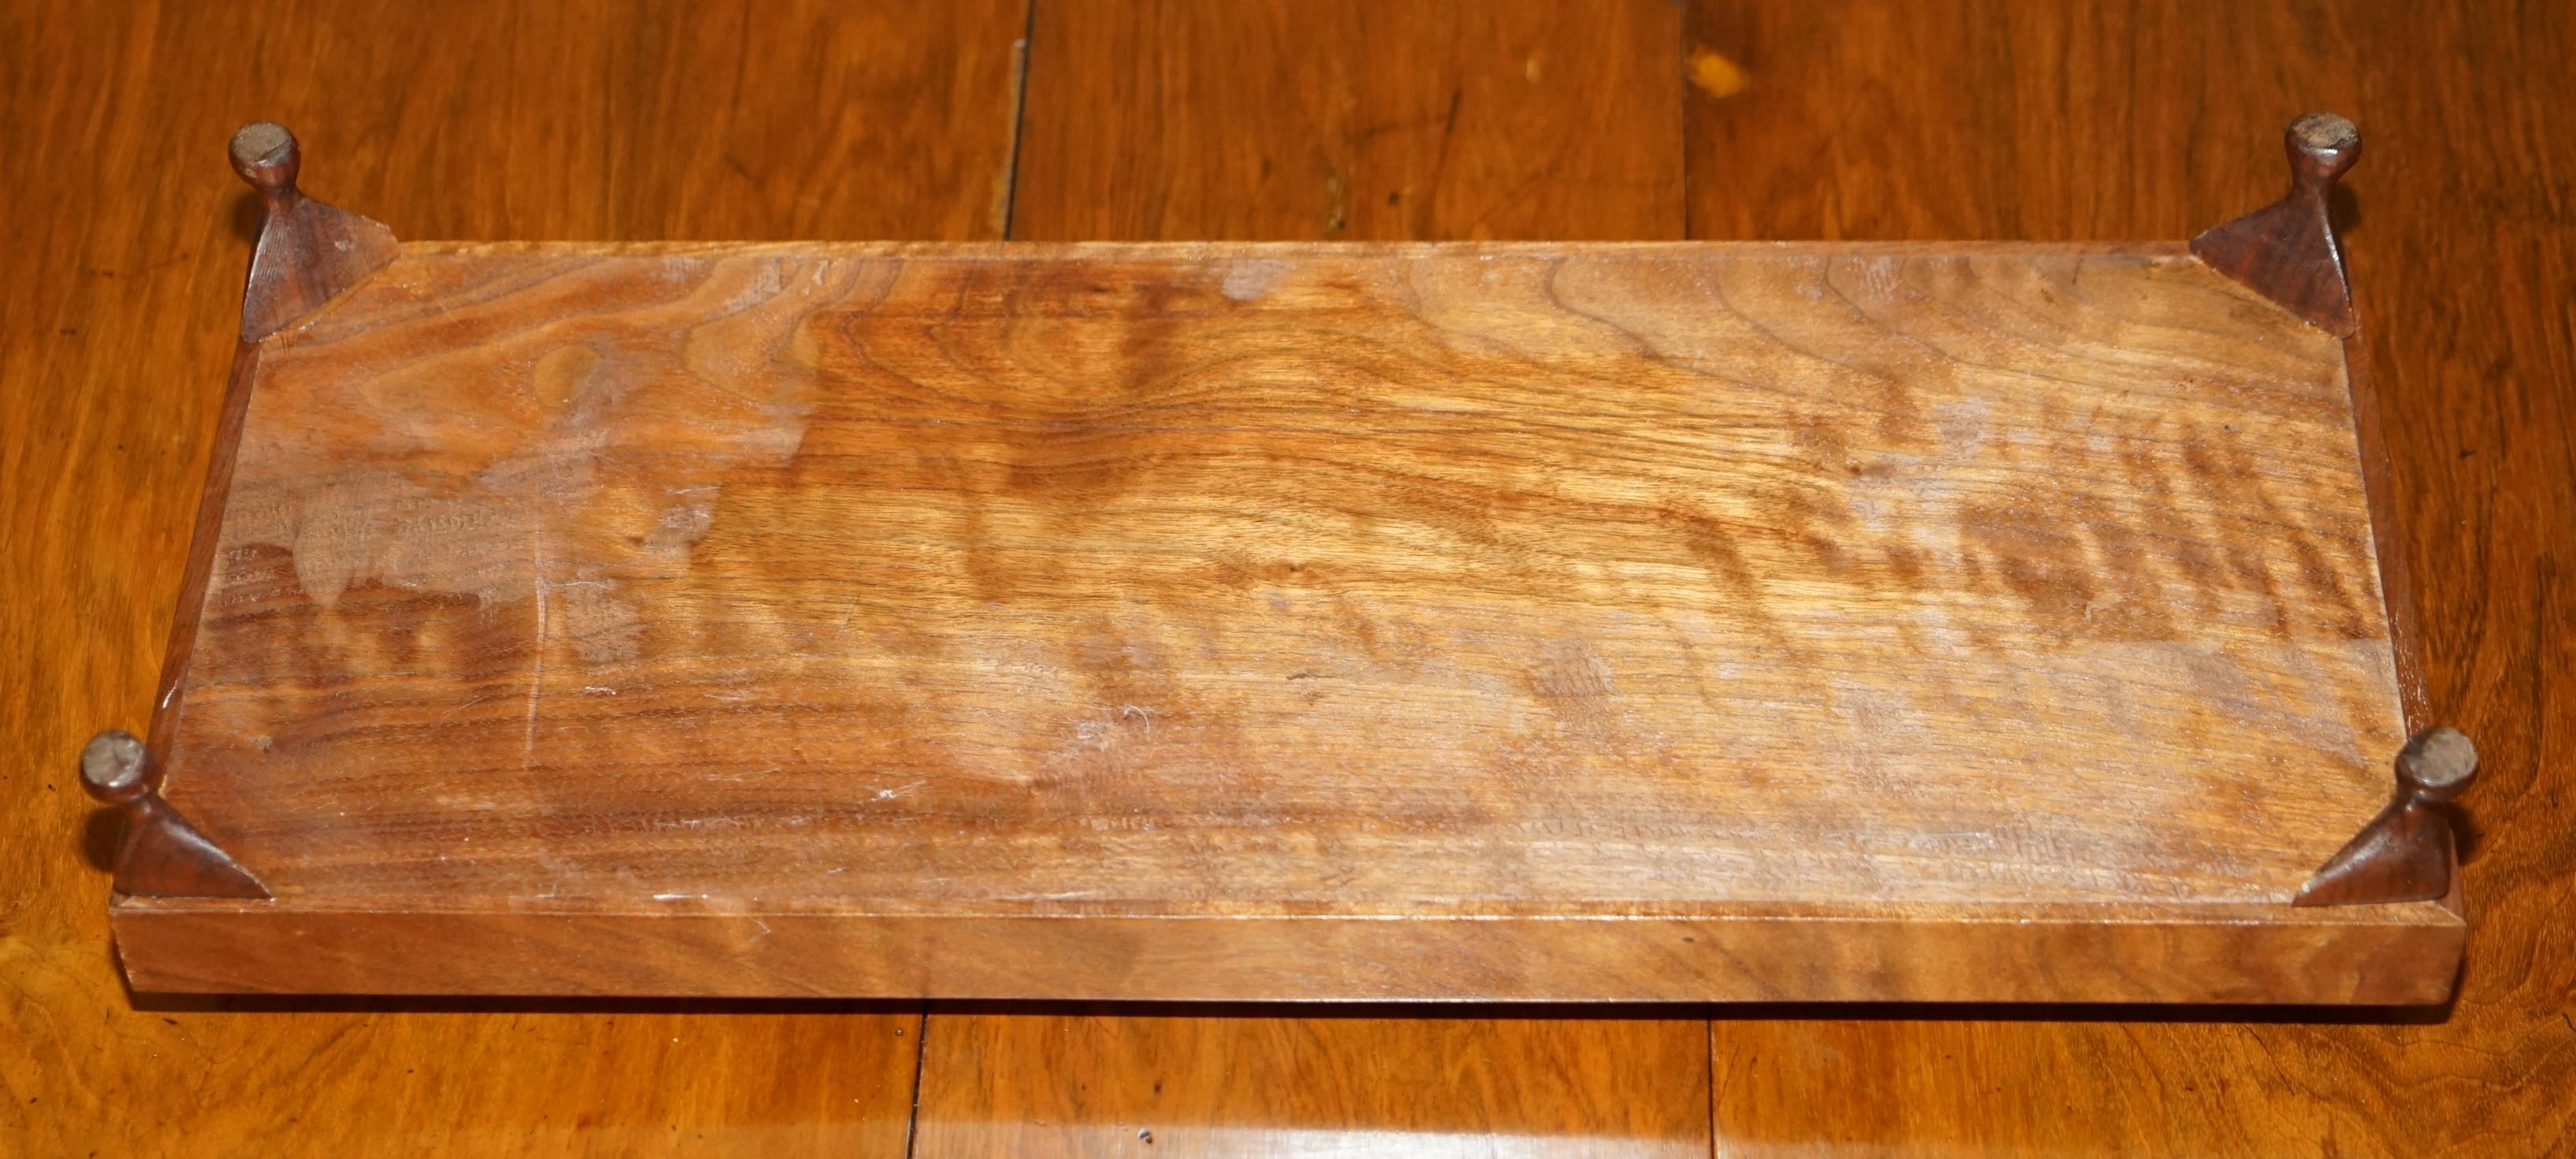 Lovely Decorative Vintage Hardwood Small Serving Tray with Tiny Cabriole Legs For Sale 2